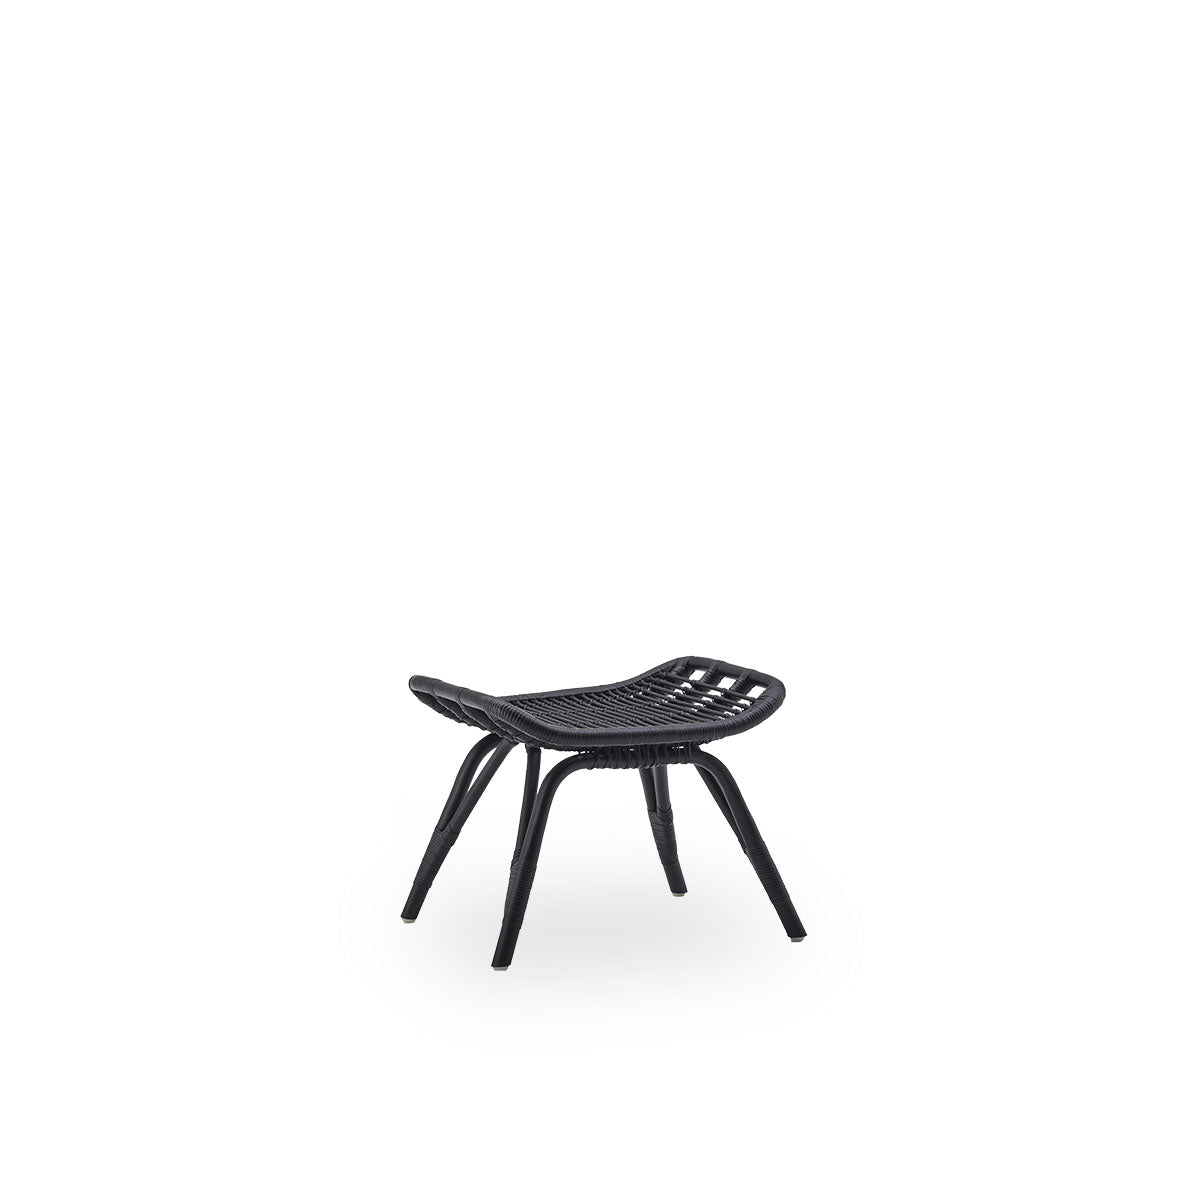 Monet Foot Stool by Sika